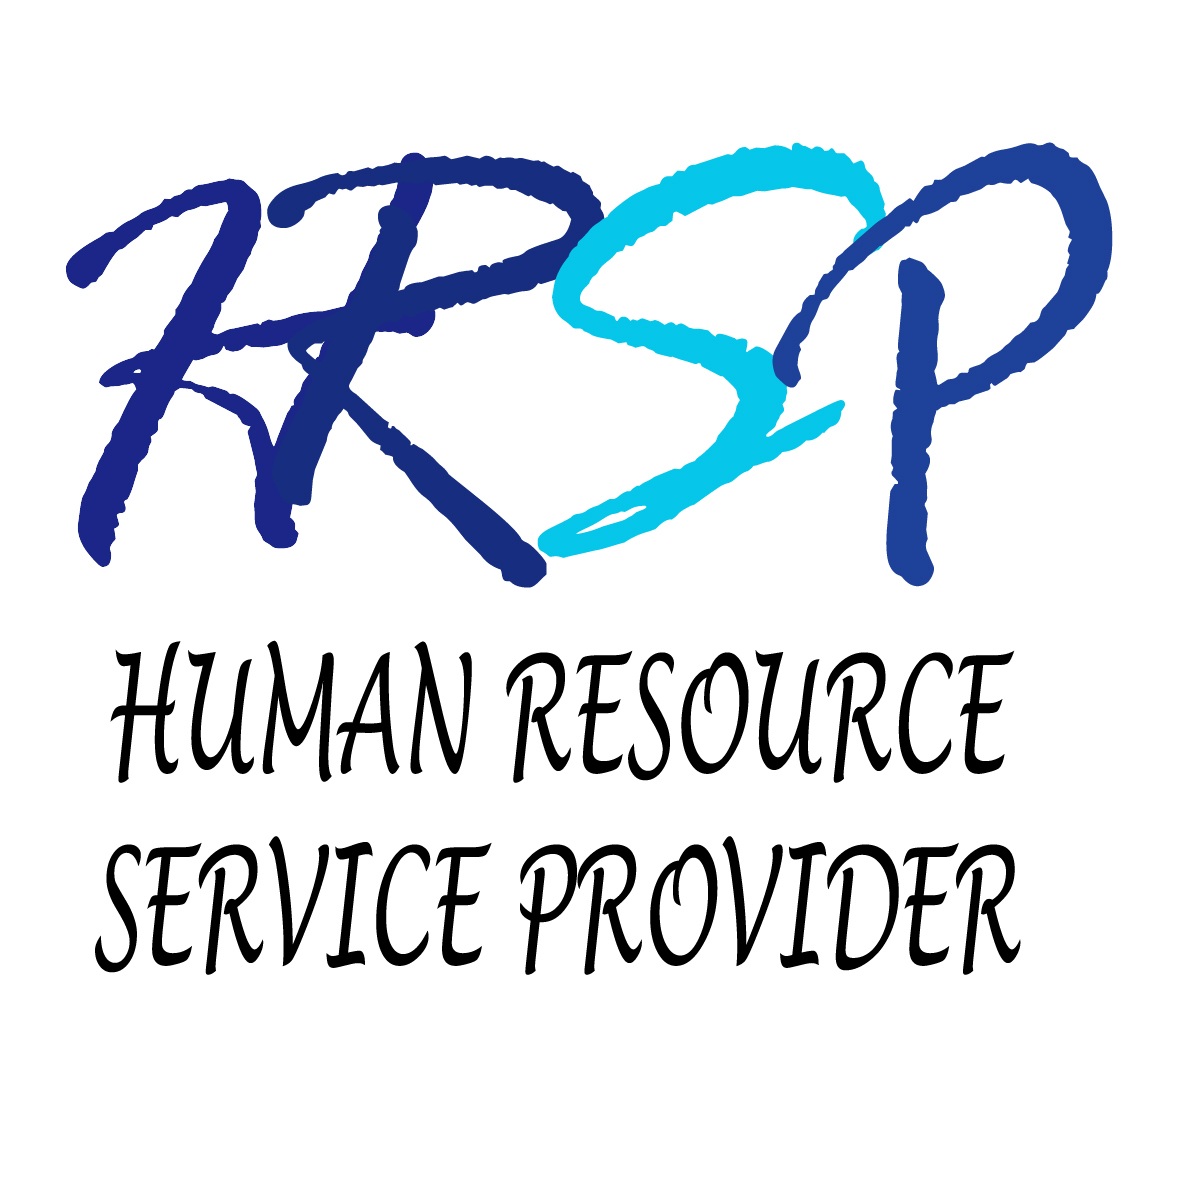 https://www.pakpositions.com/company/human-resource-service-provider-1648208118